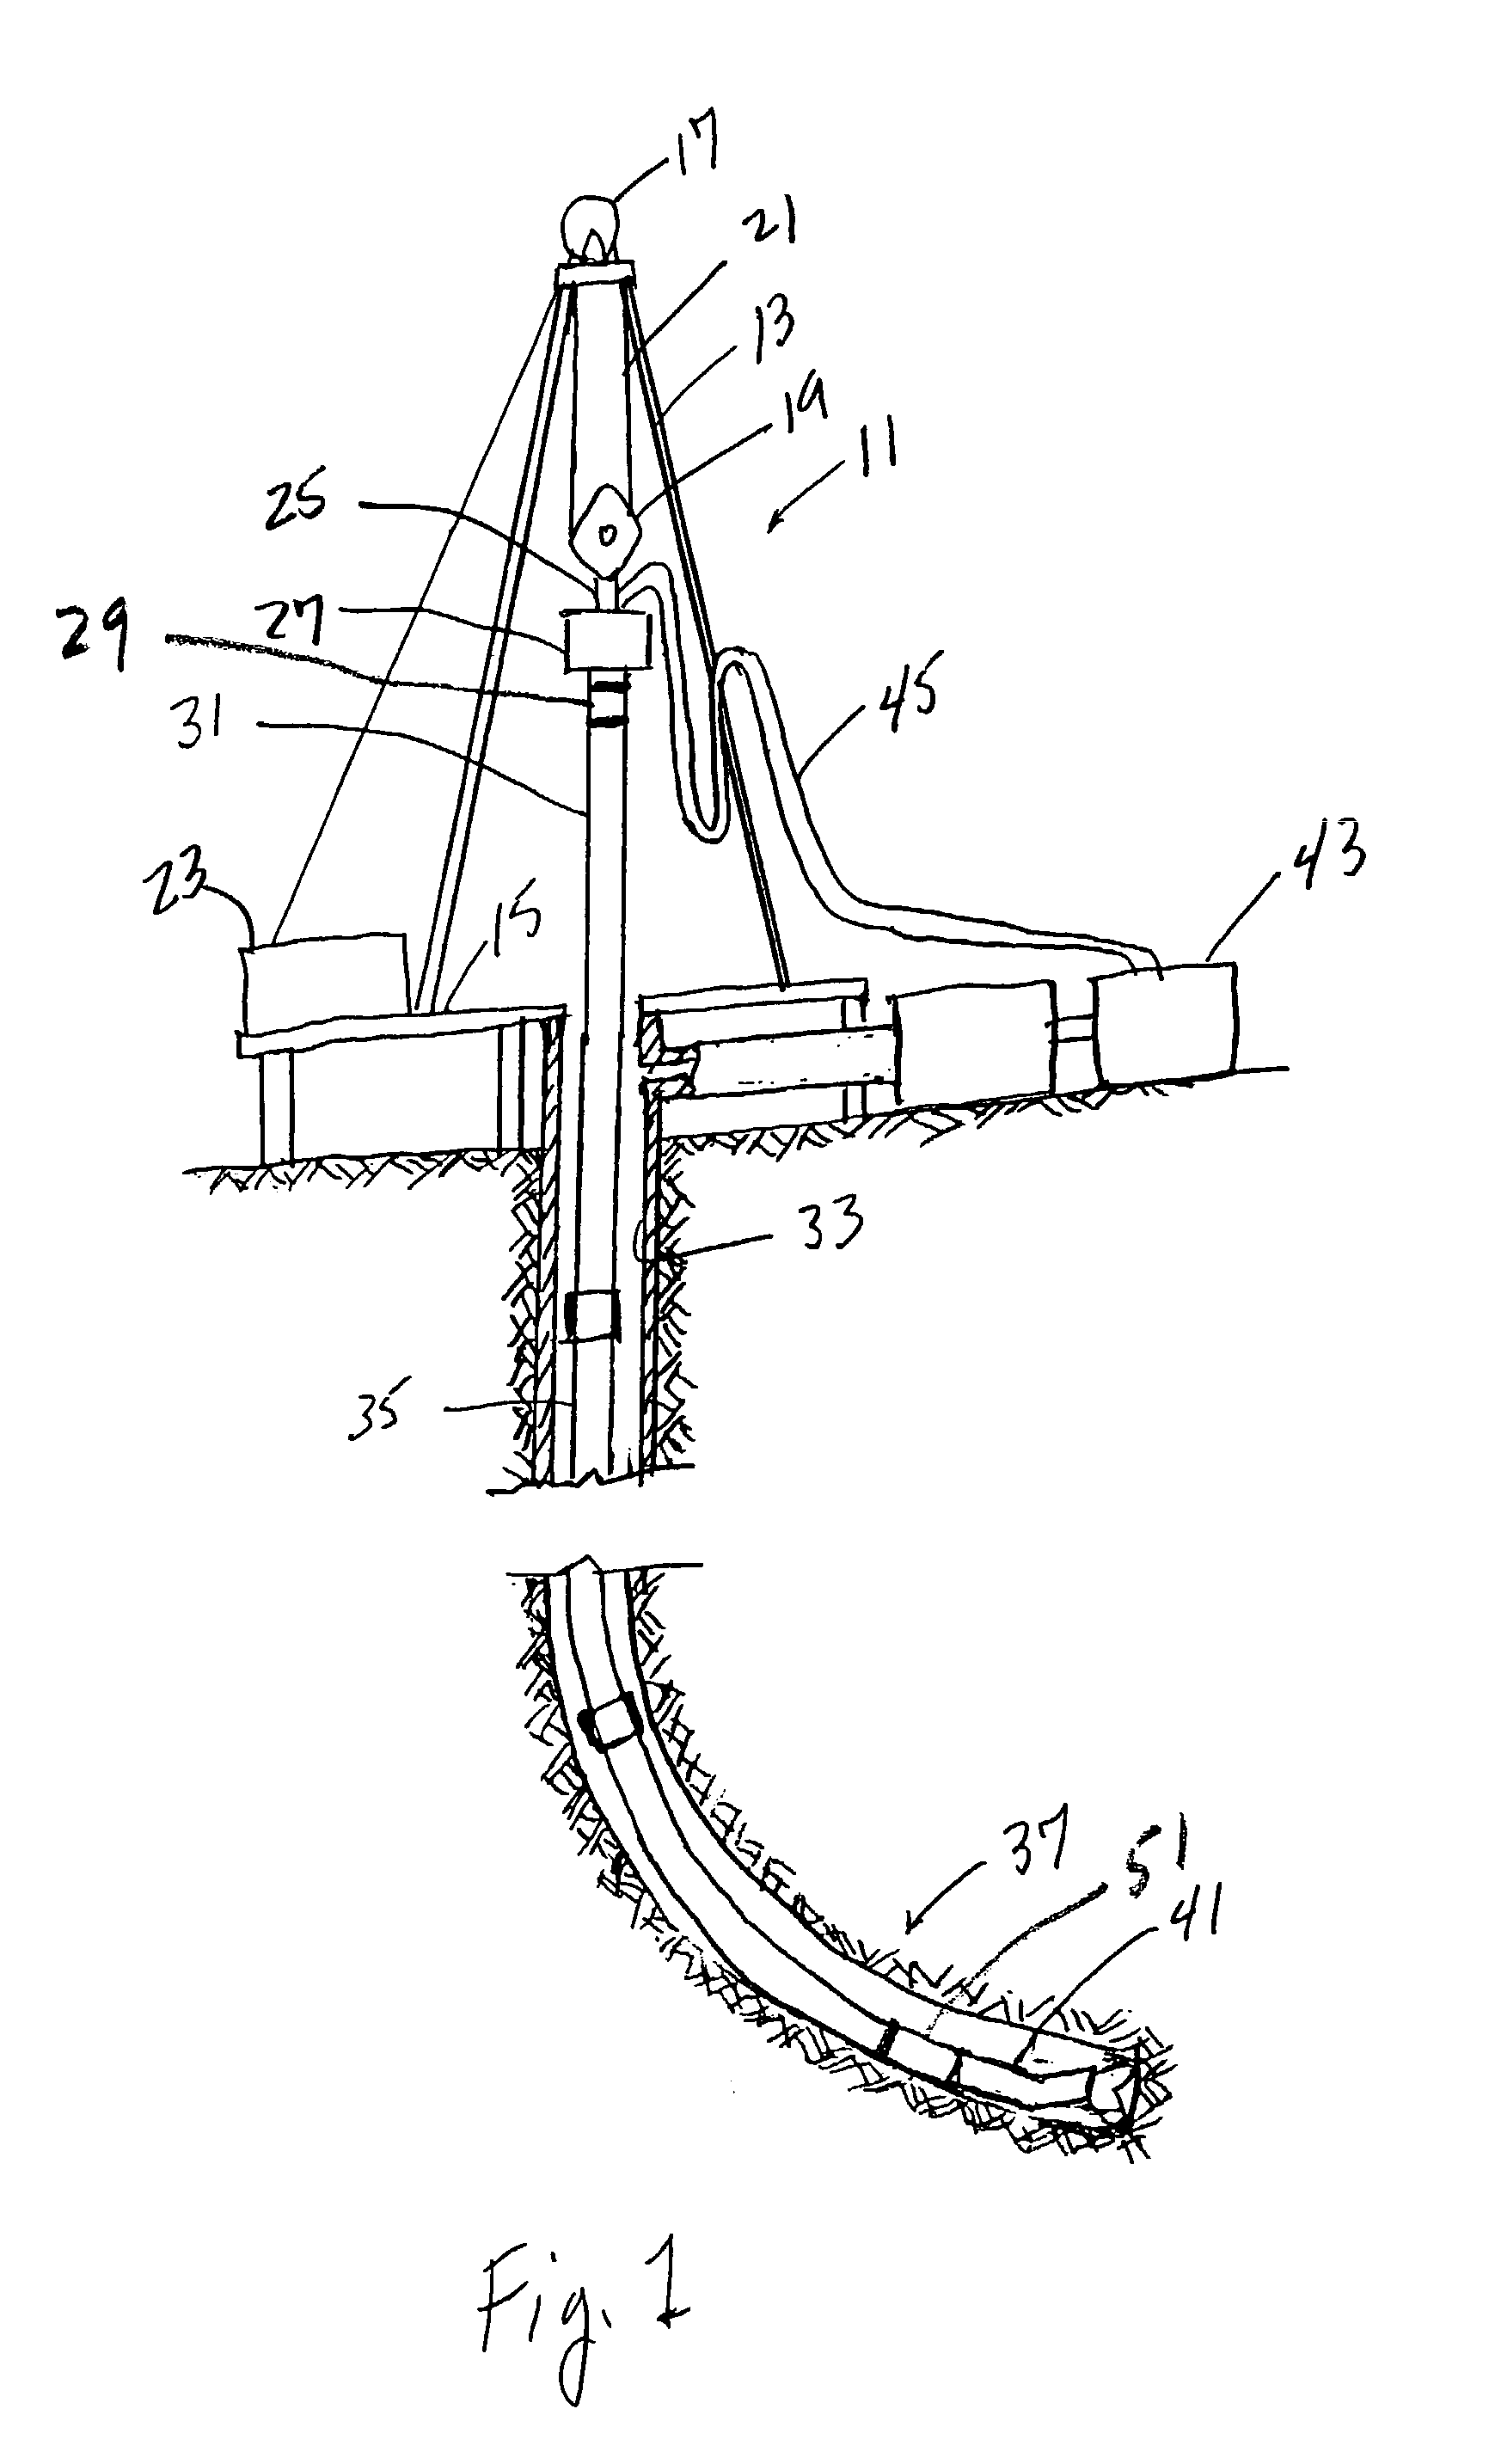 Continuous on-bottom directional drilling method and system